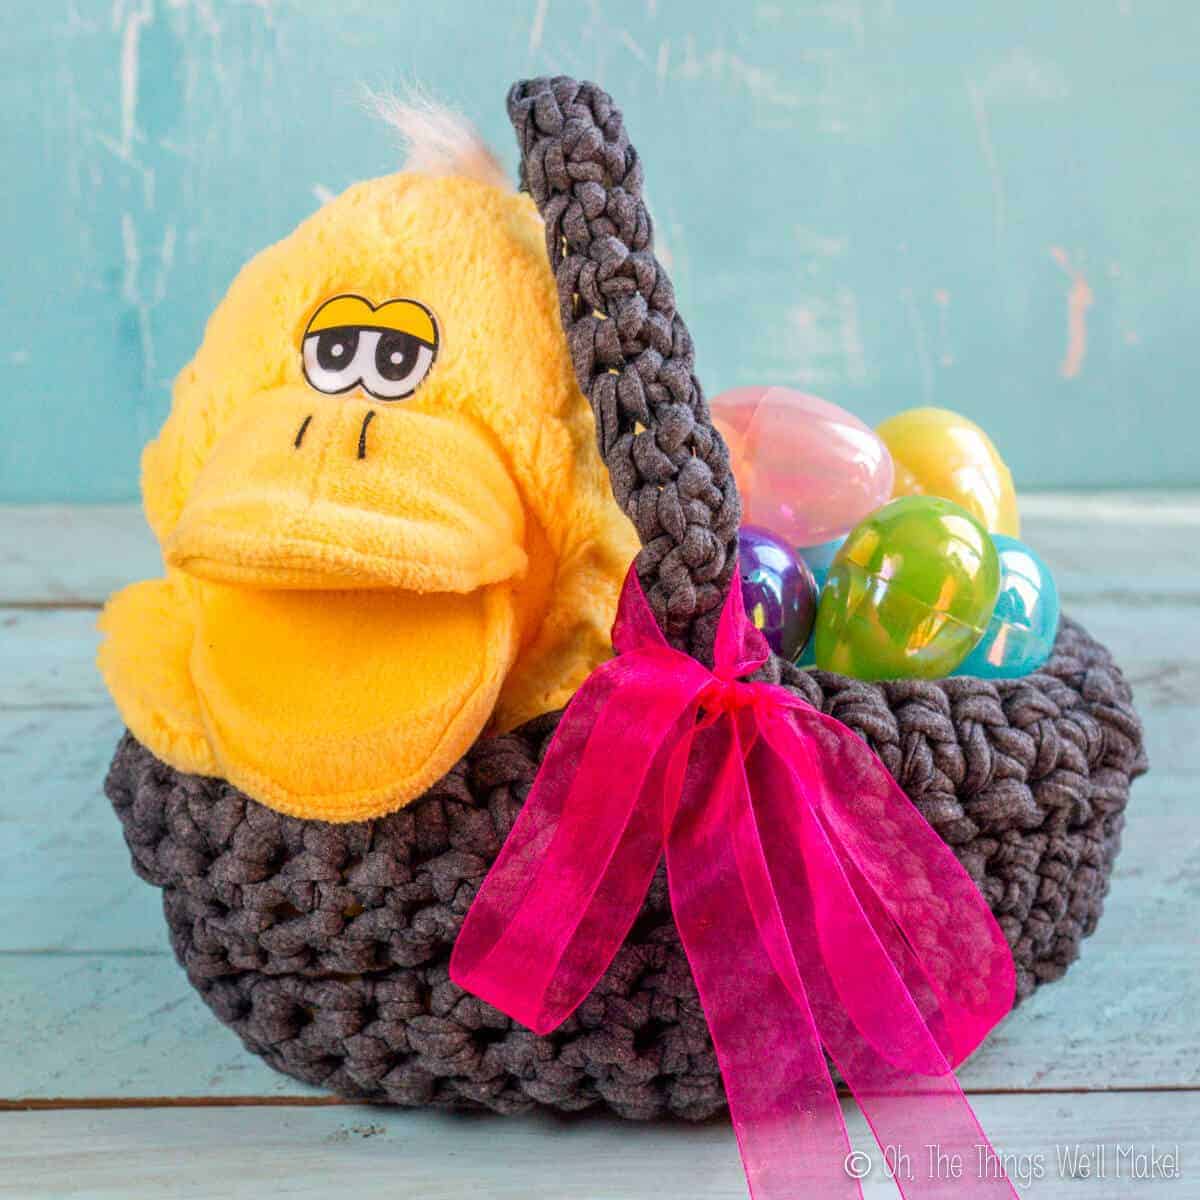 Upcycle those old t-shirts into a cute, easy DIY crochet Easter basket. Even a beginner can make this in only a couple of hours. #Easter #crochet #basket #Easterbasket